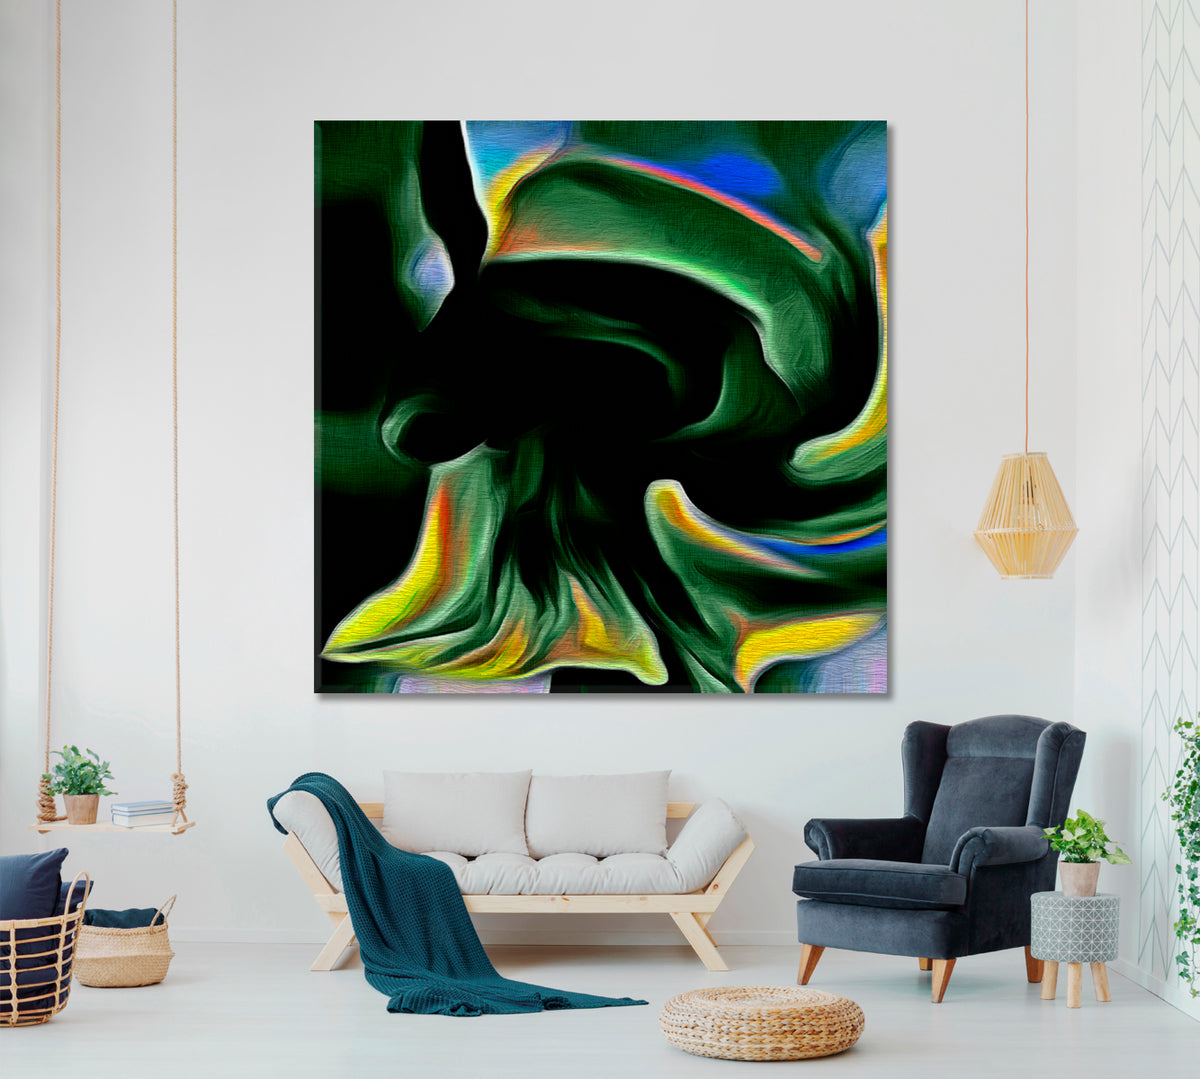 VIBRANT Green and Yellow Abstract Fractal Psychedelic Shape - Square Panel 1 Abstract Art Print Artesty 1 Panel 12"x12" 